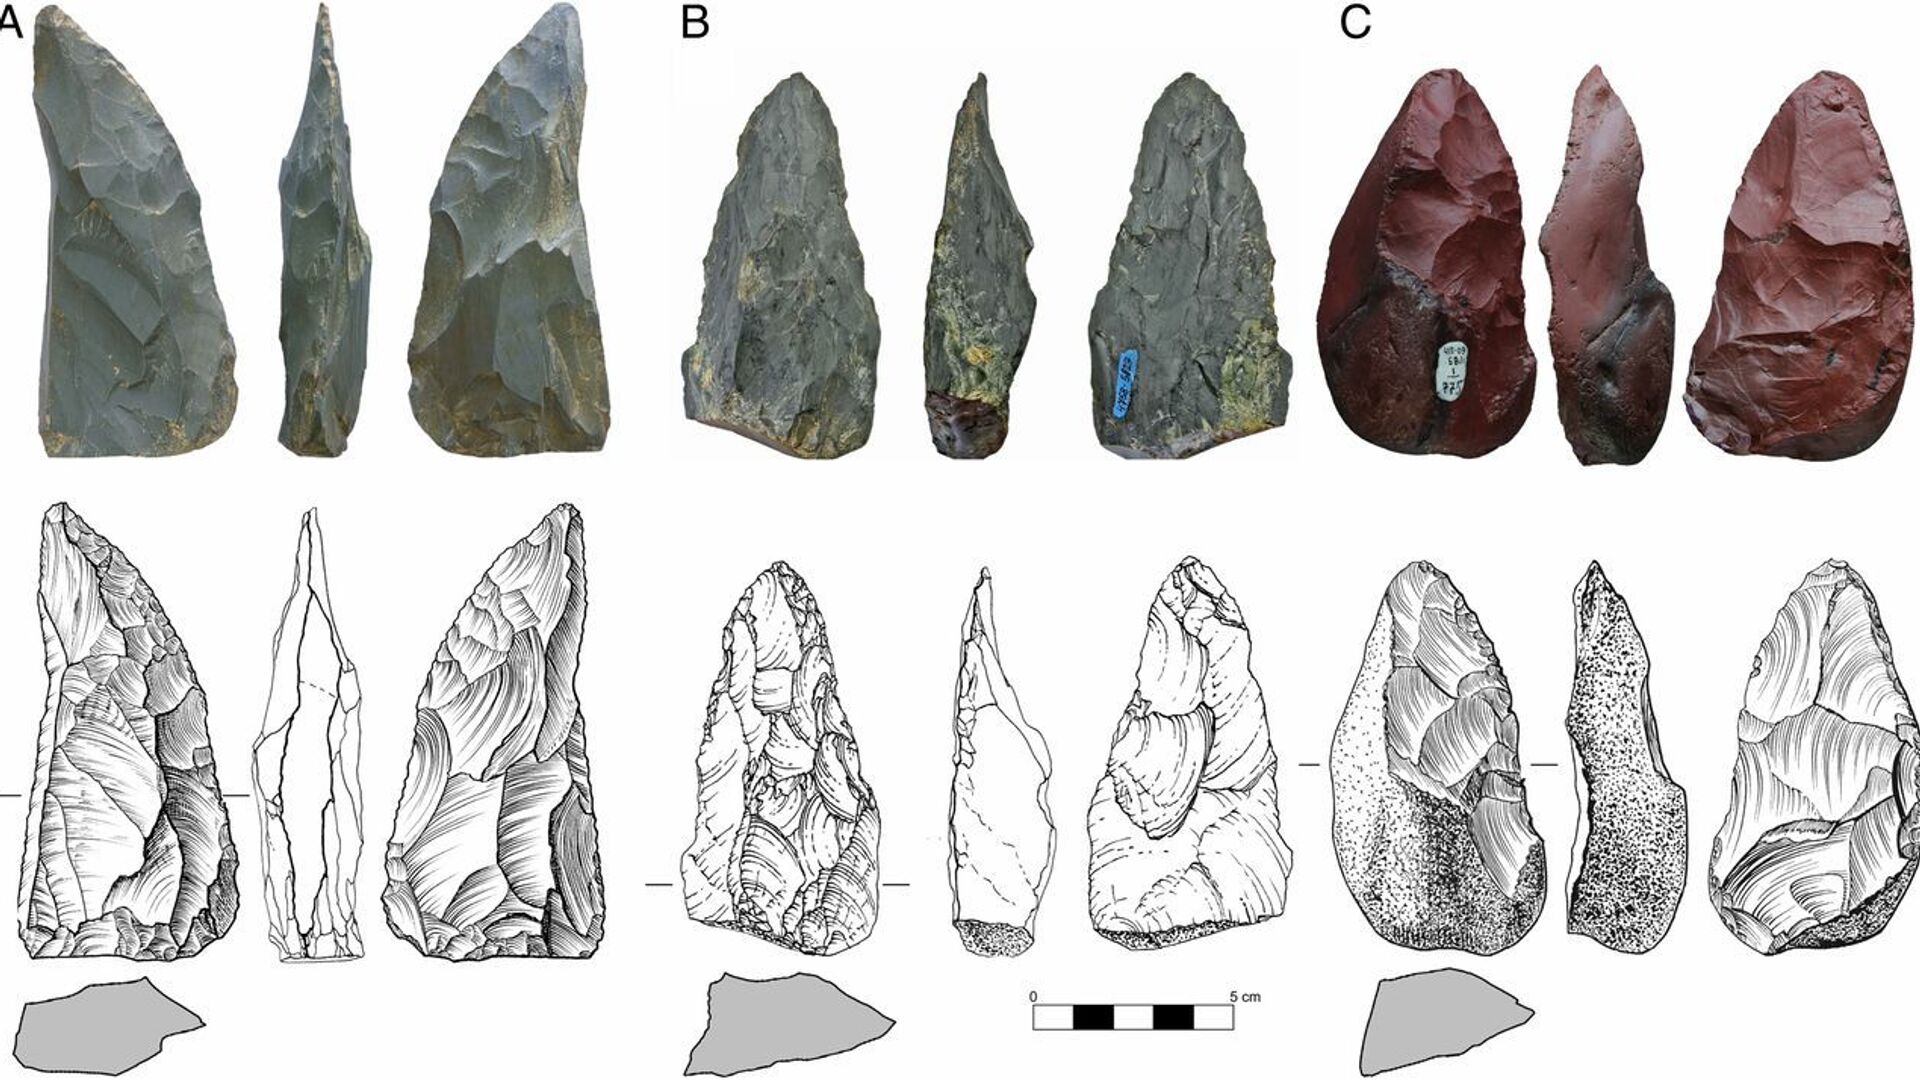 Stone Age Tools And Weapons Information